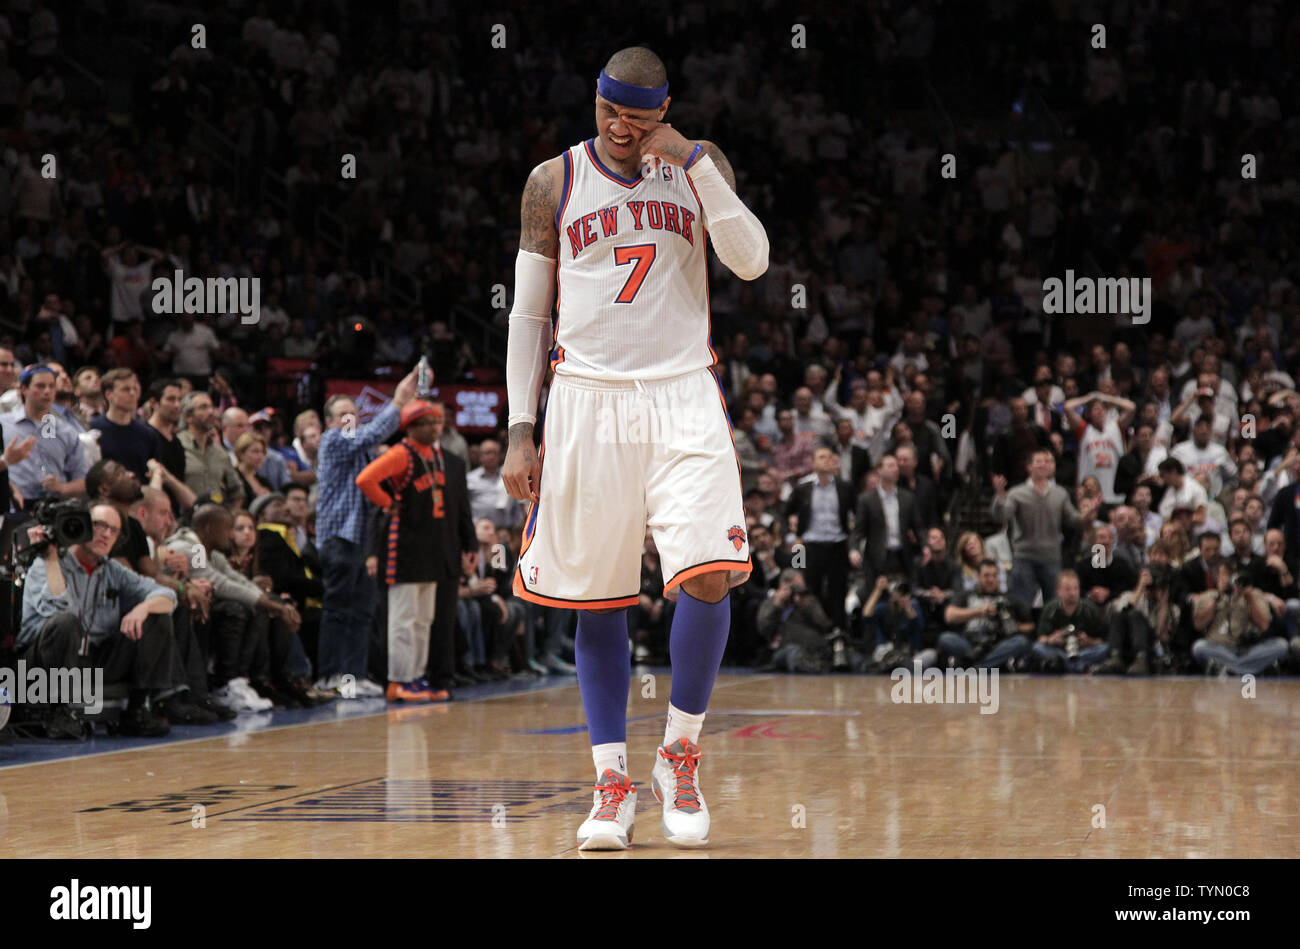 New York Knicks Carmelo Anthony rubs his eye in the fourth quarter